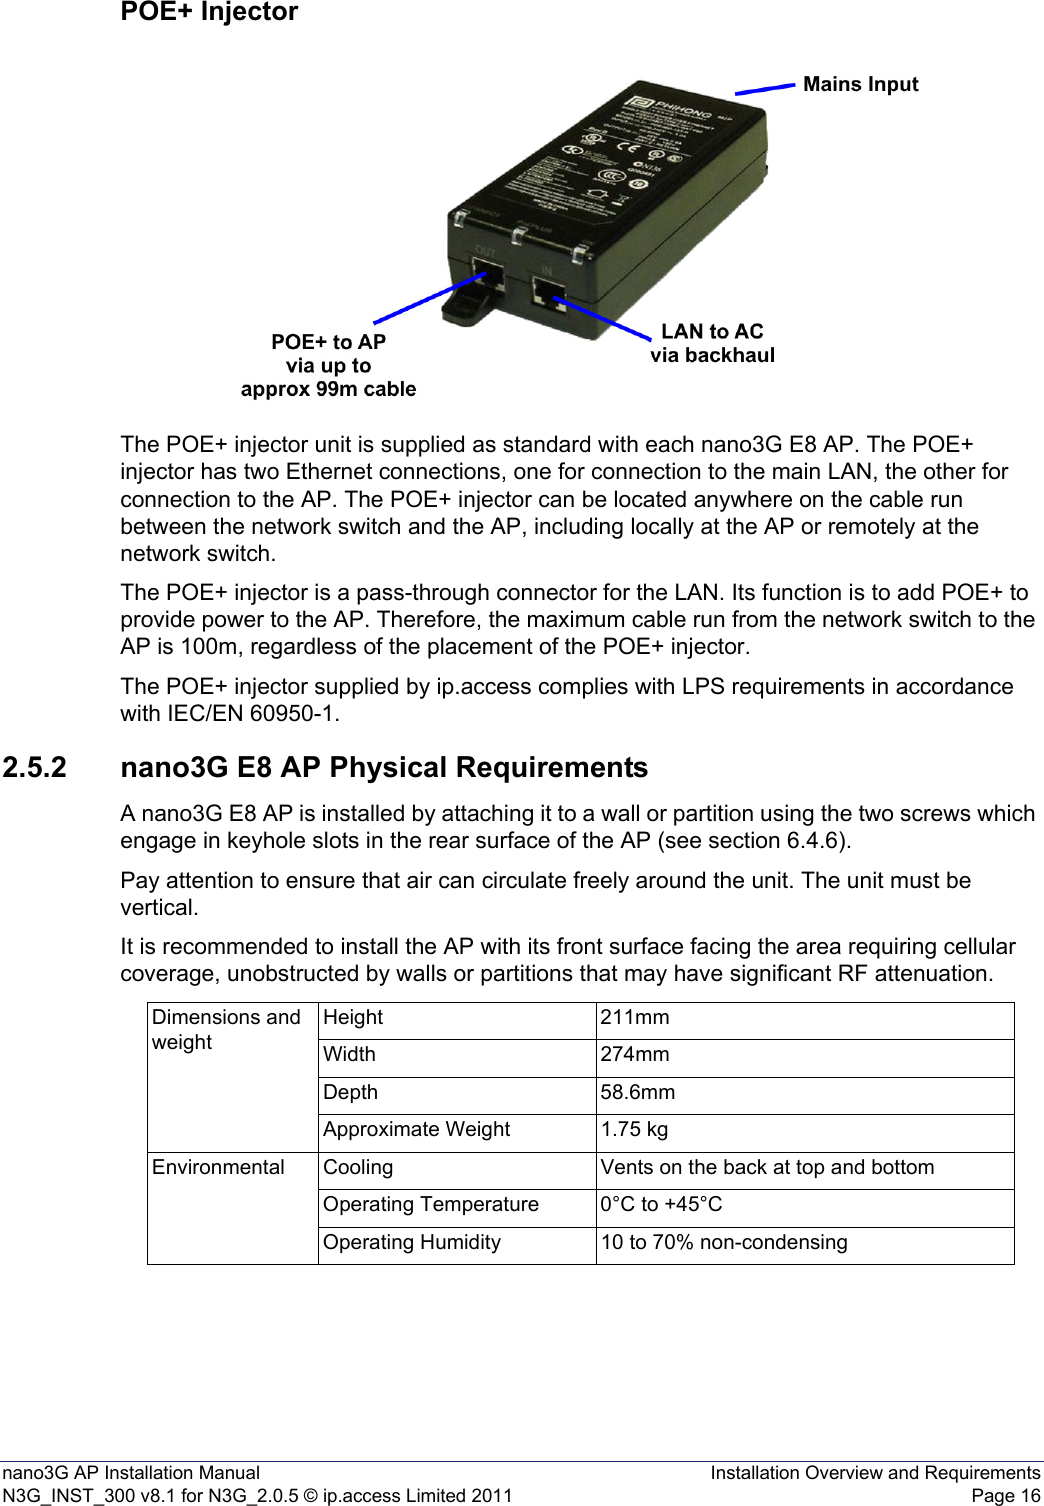 nano3G AP Installation Manual Installation Overview and RequirementsN3G_INST_300 v8.1 for N3G_2.0.5 © ip.access Limited 2011 Page 16POE+ InjectorThe POE+ injector unit is supplied as standard with each nano3G E8 AP. The POE+ injector has two Ethernet connections, one for connection to the main LAN, the other for connection to the AP. The POE+ injector can be located anywhere on the cable run between the network switch and the AP, including locally at the AP or remotely at the network switch.The POE+ injector is a pass-through connector for the LAN. Its function is to add POE+ to provide power to the AP. Therefore, the maximum cable run from the network switch to the AP is 100m, regardless of the placement of the POE+ injector.The POE+ injector supplied by ip.access complies with LPS requirements in accordance with IEC/EN 60950-1.2.5.2 nano3G E8 AP Physical RequirementsA nano3G E8 AP is installed by attaching it to a wall or partition using the two screws which engage in keyhole slots in the rear surface of the AP (see section 6.4.6).Pay attention to ensure that air can circulate freely around the unit. The unit must be vertical.It is recommended to install the AP with its front surface facing the area requiring cellular coverage, unobstructed by walls or partitions that may have significant RF attenuation.Dimensions and weightHeight 211mmWidth 274mmDepth 58.6mmApproximate Weight 1.75 kgEnvironmental Cooling Vents on the back at top and bottomOperating Temperature 0°C to +45°COperating Humidity 10 to 70% non-condensing